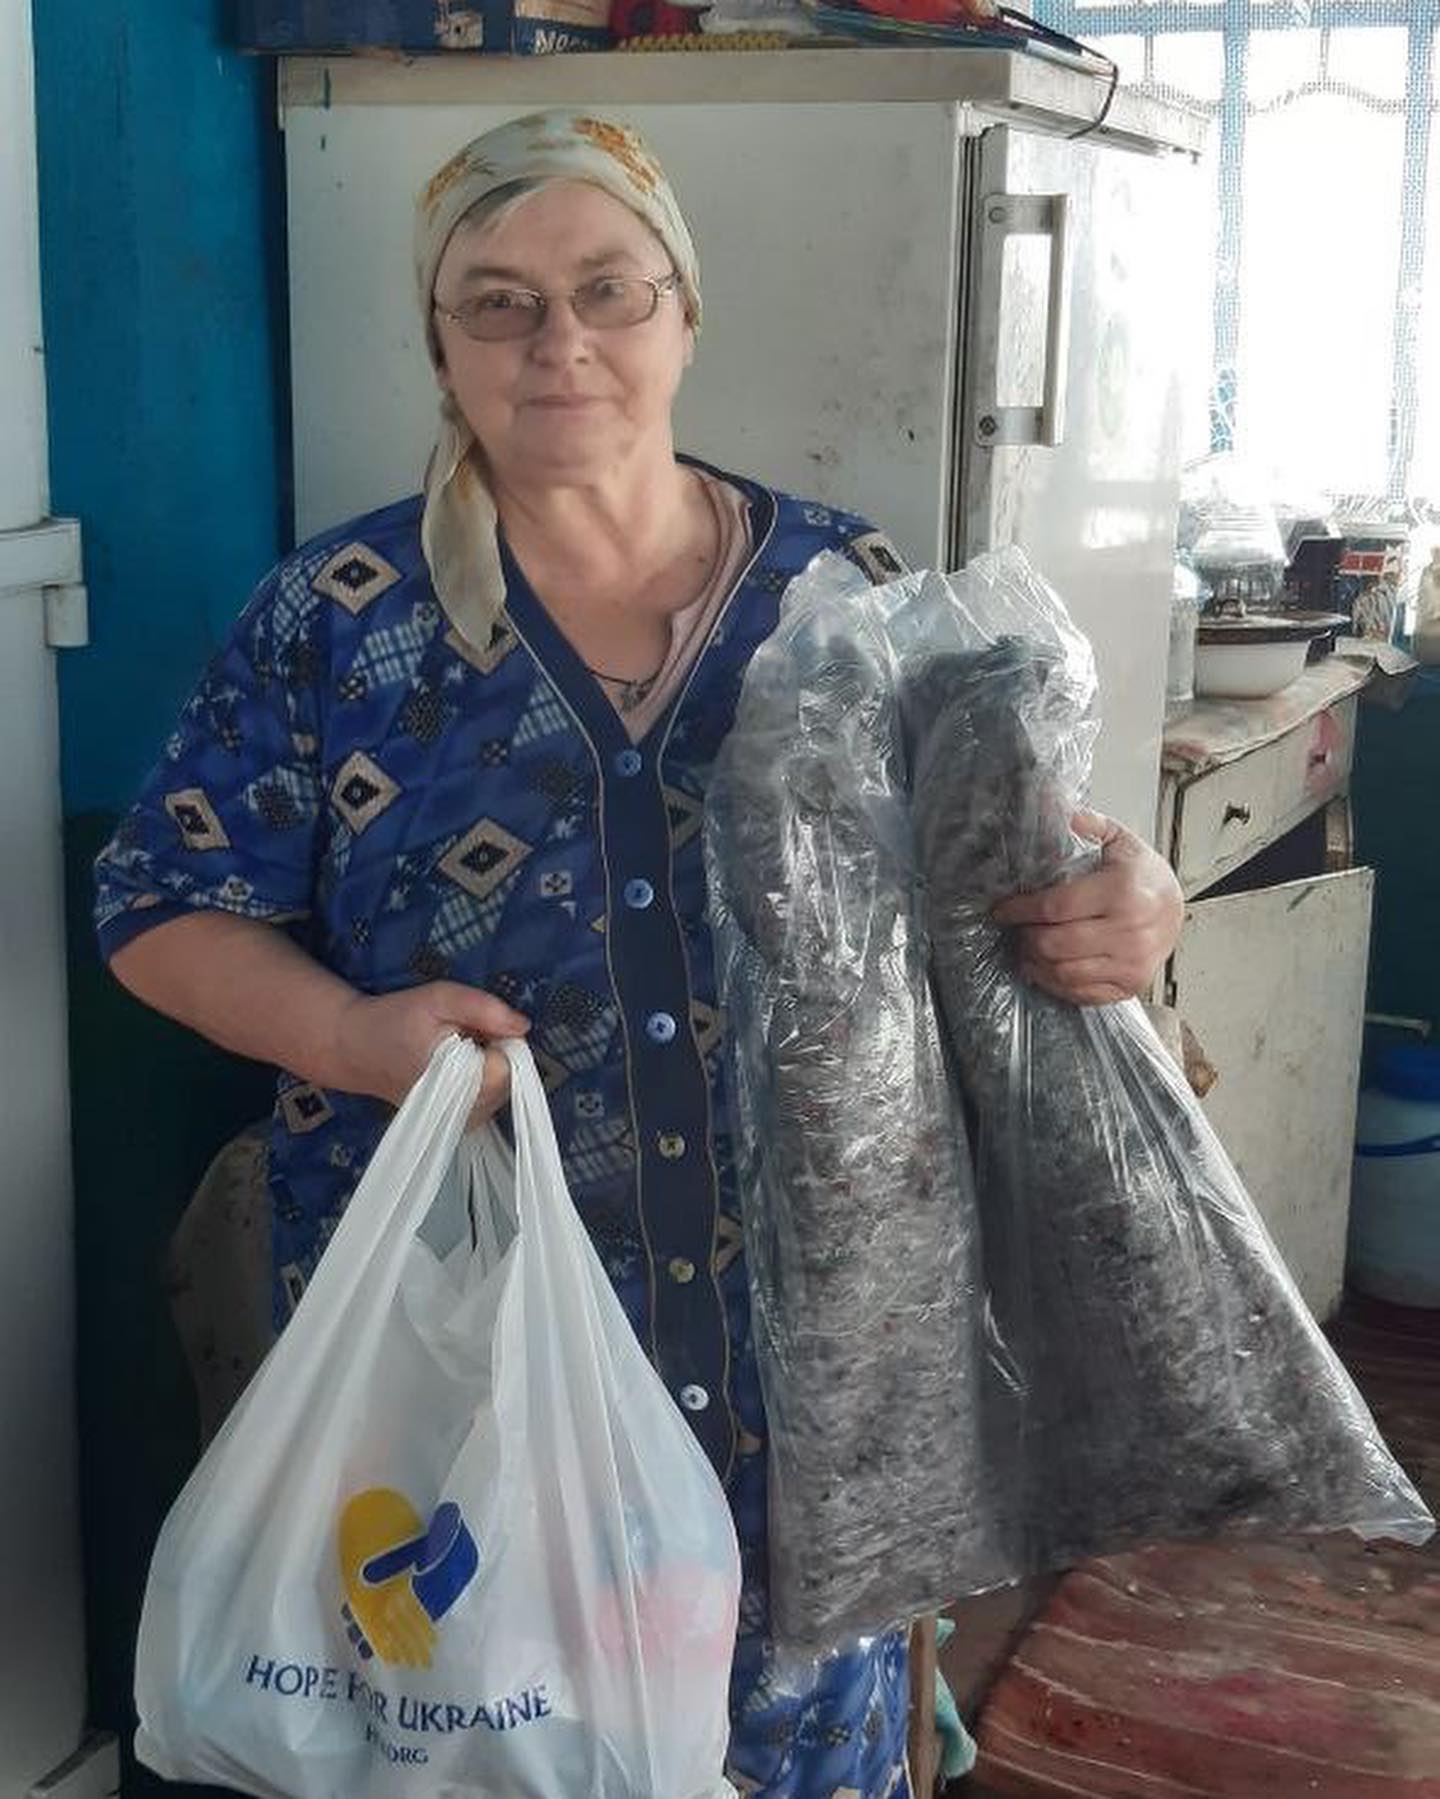 A woman is holding bags of fish in a kitchen.